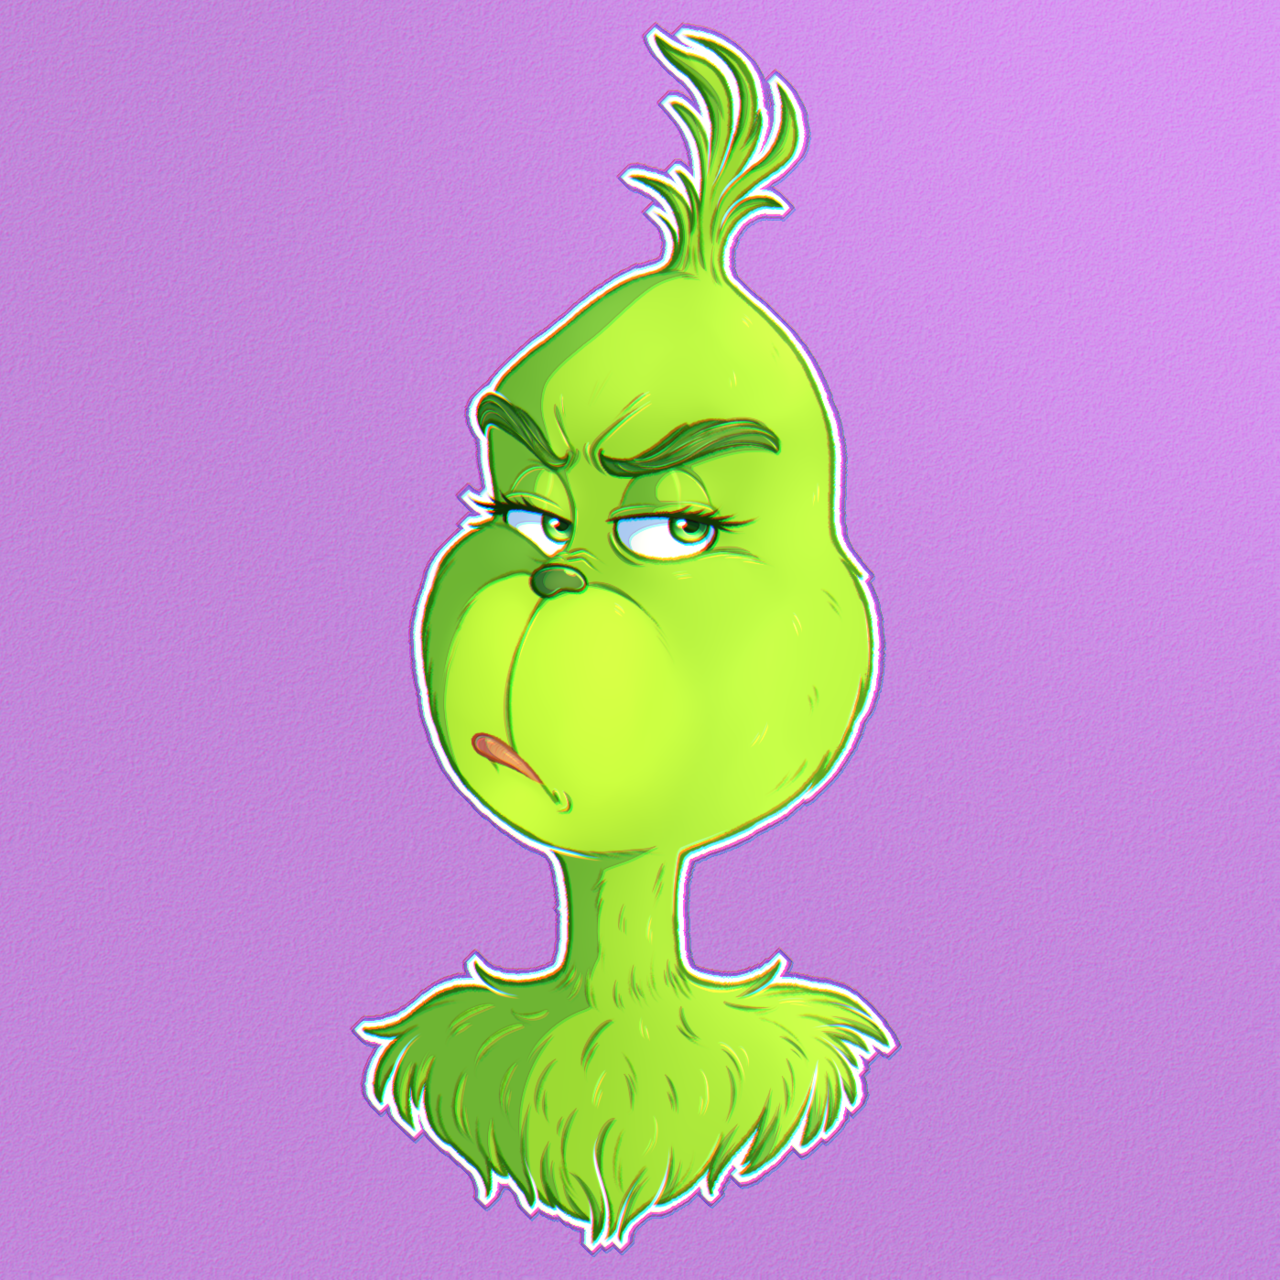 justapapersketch: I wanted to draw the different adaptations/designs of the Grinch